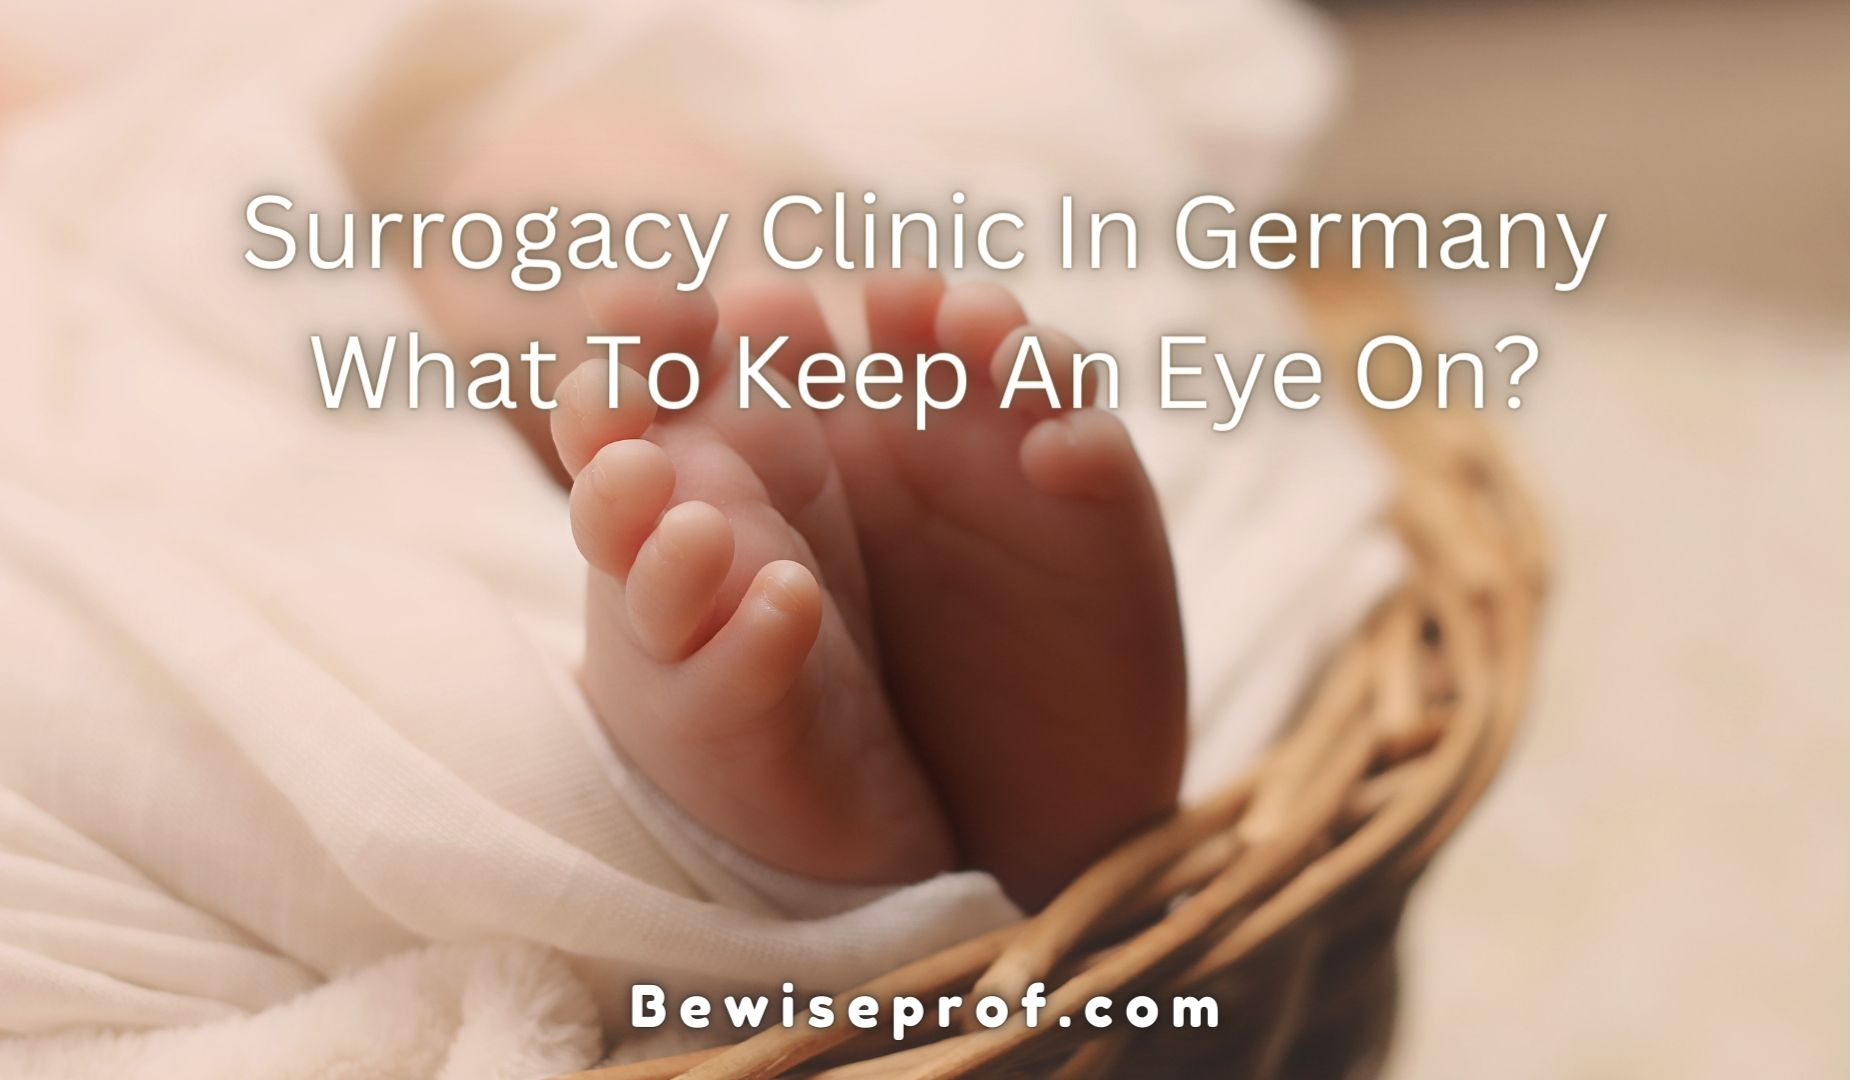 Surrogacy Clinic In Germany